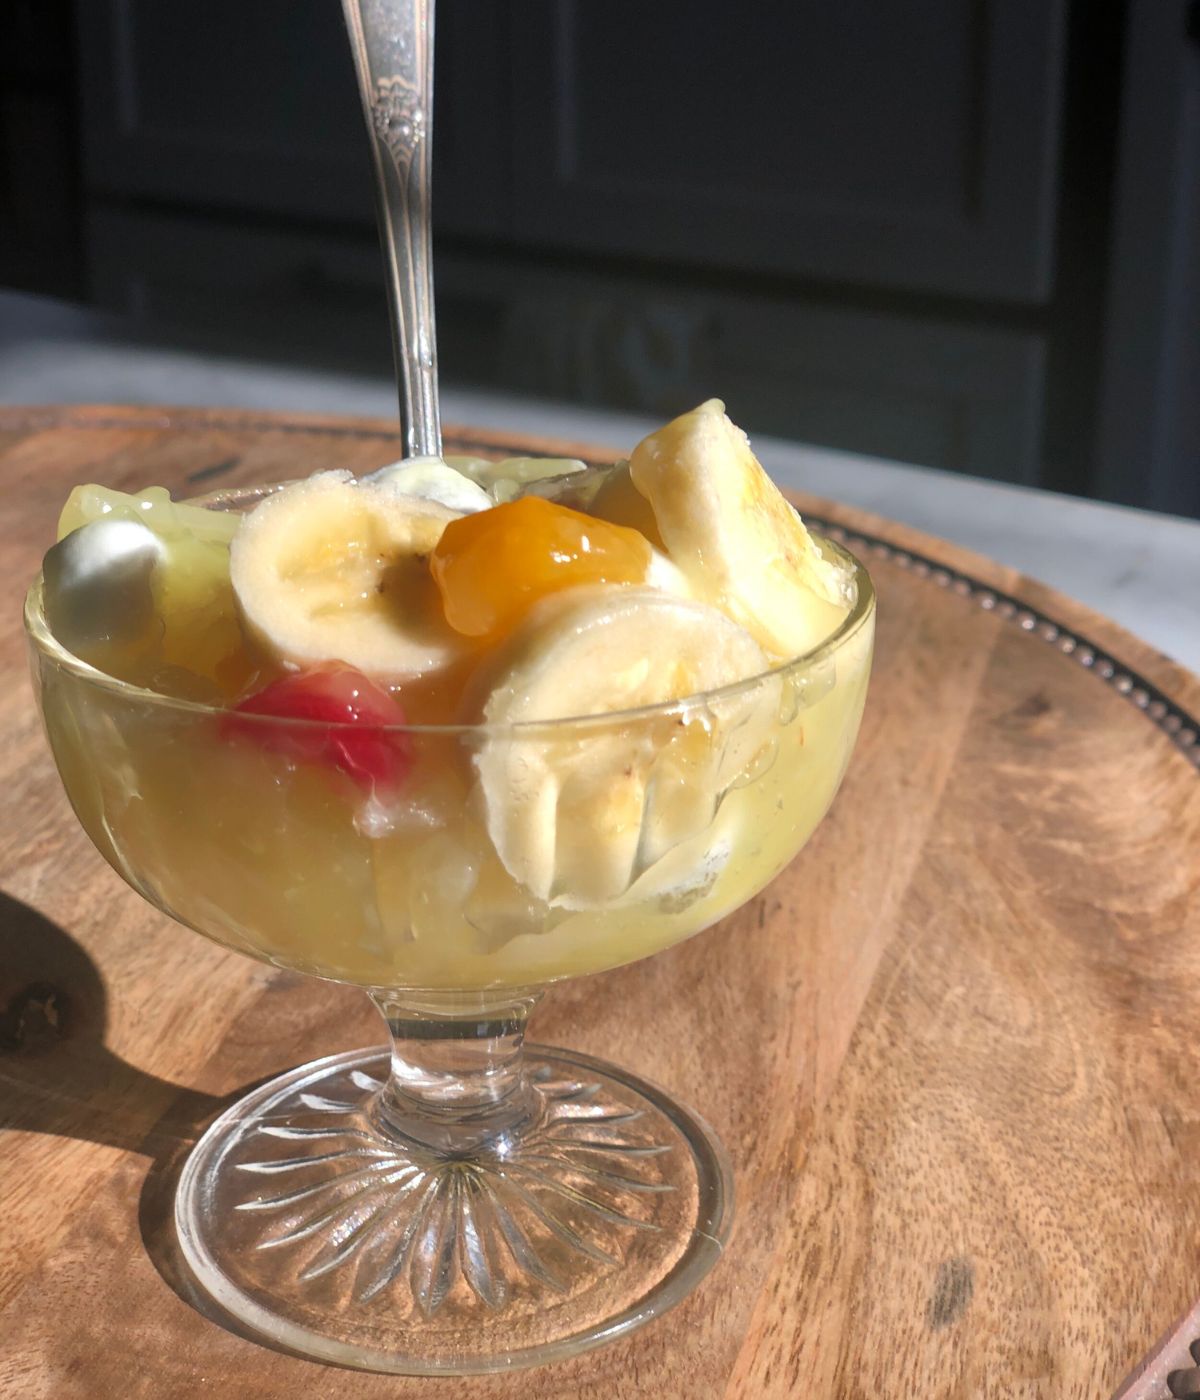 Ede's fruit salad in an individual glass serving dish